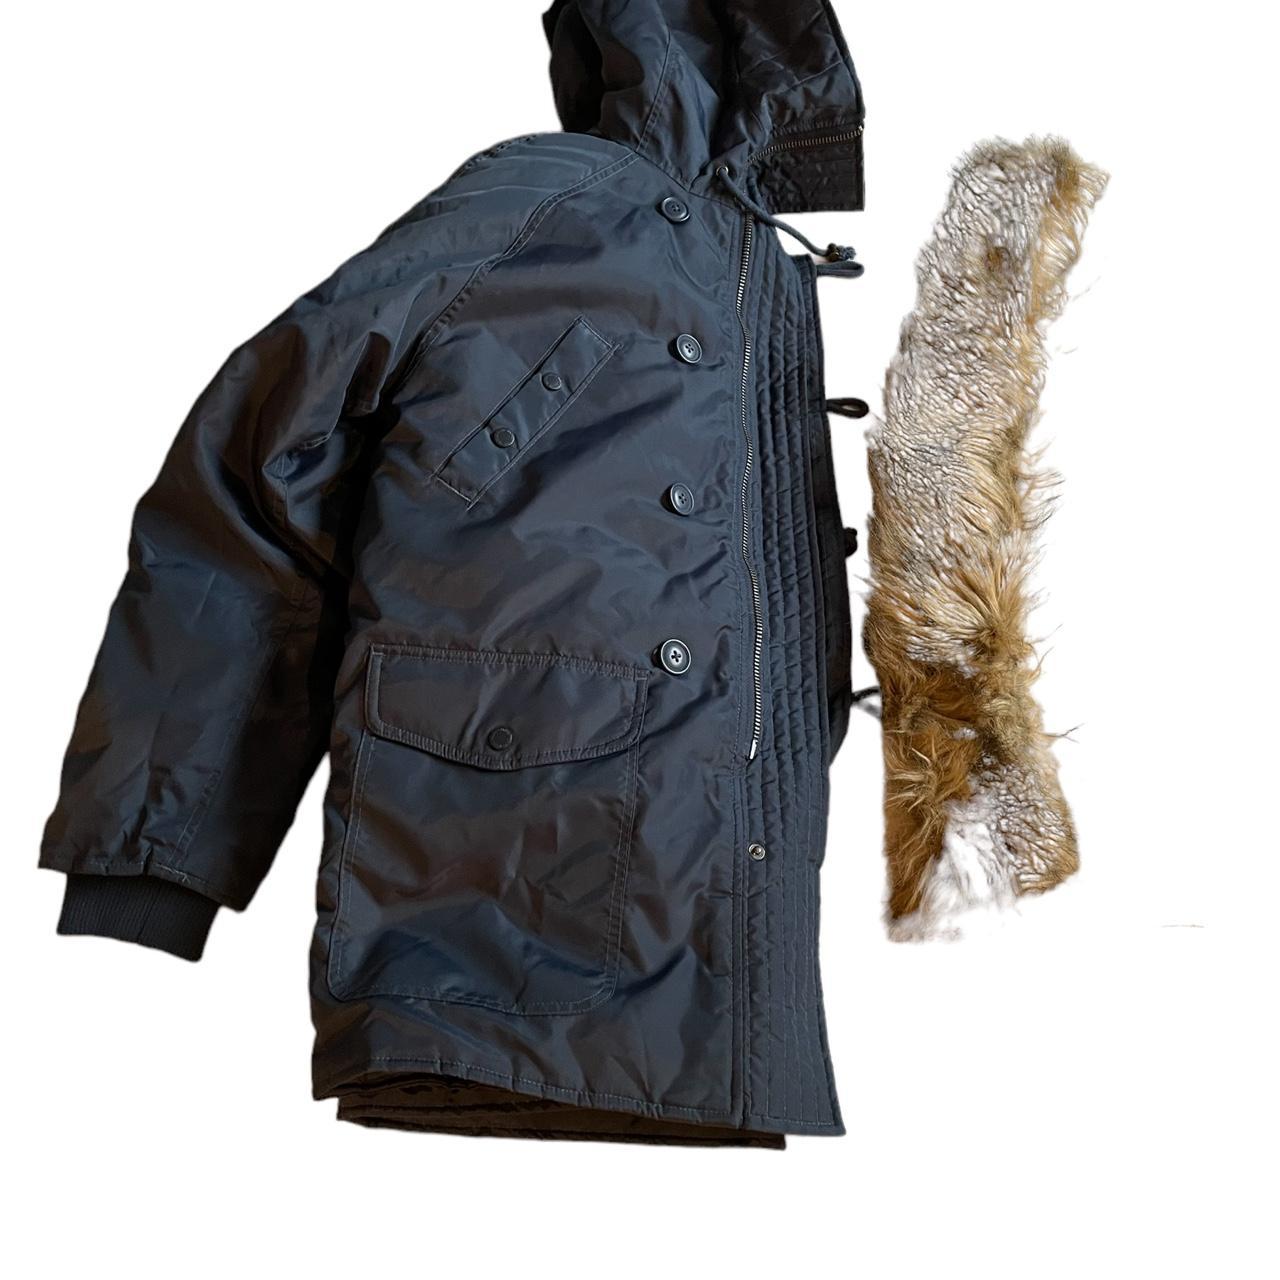 Product Image 4 - Final markdown!!
NATIVE YOUTH Men's Waterproof